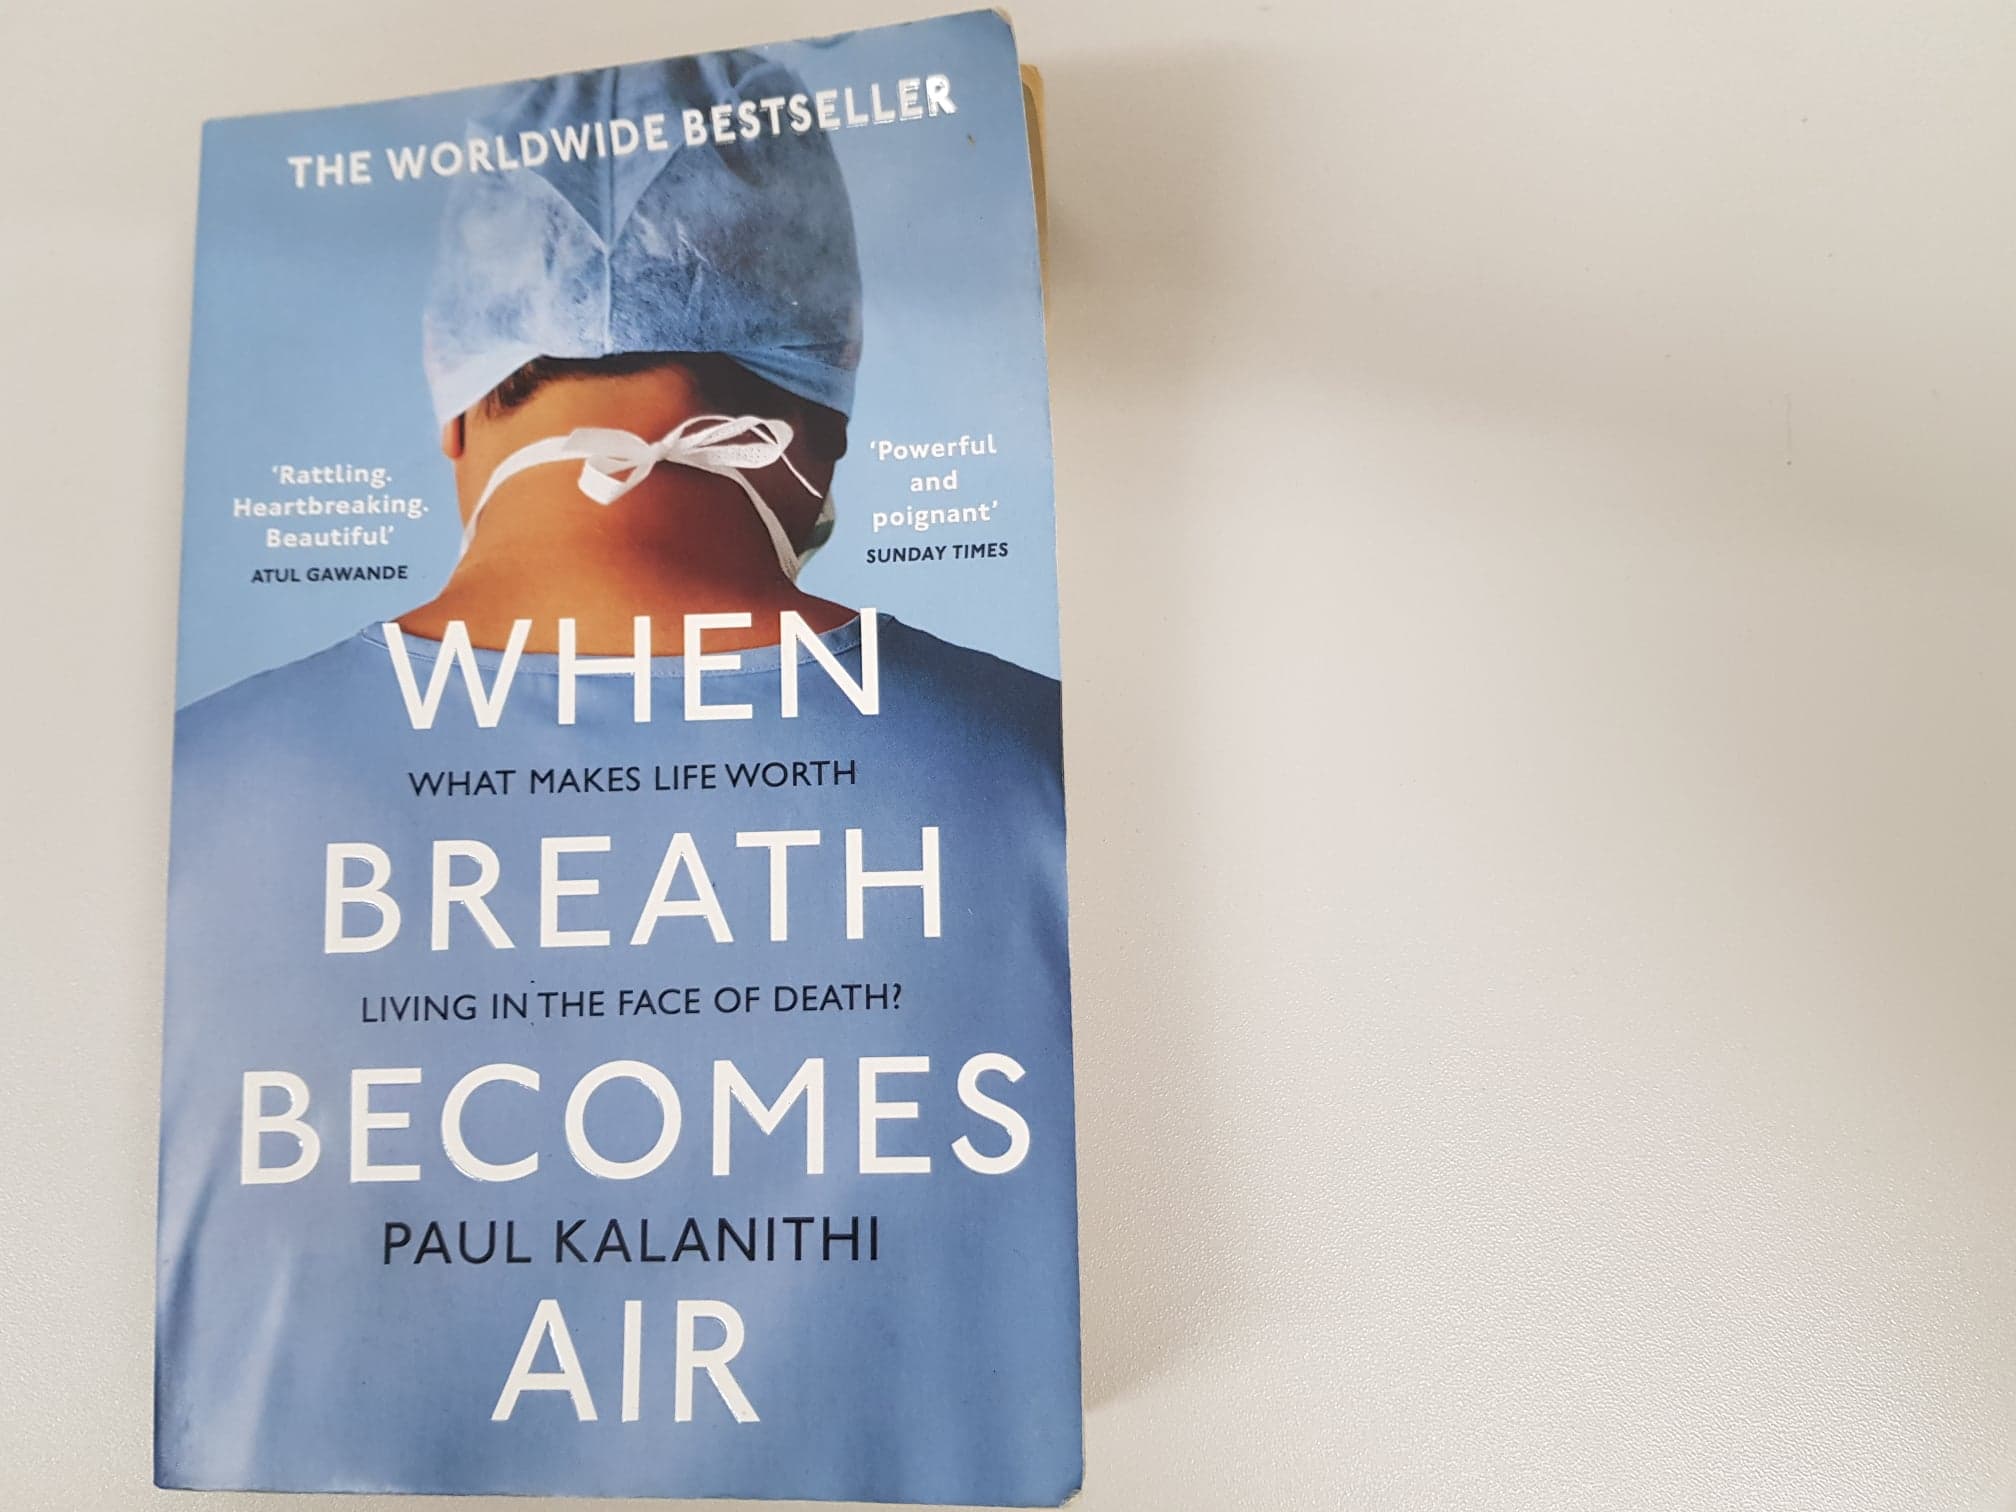 when breath becomes air epub free download